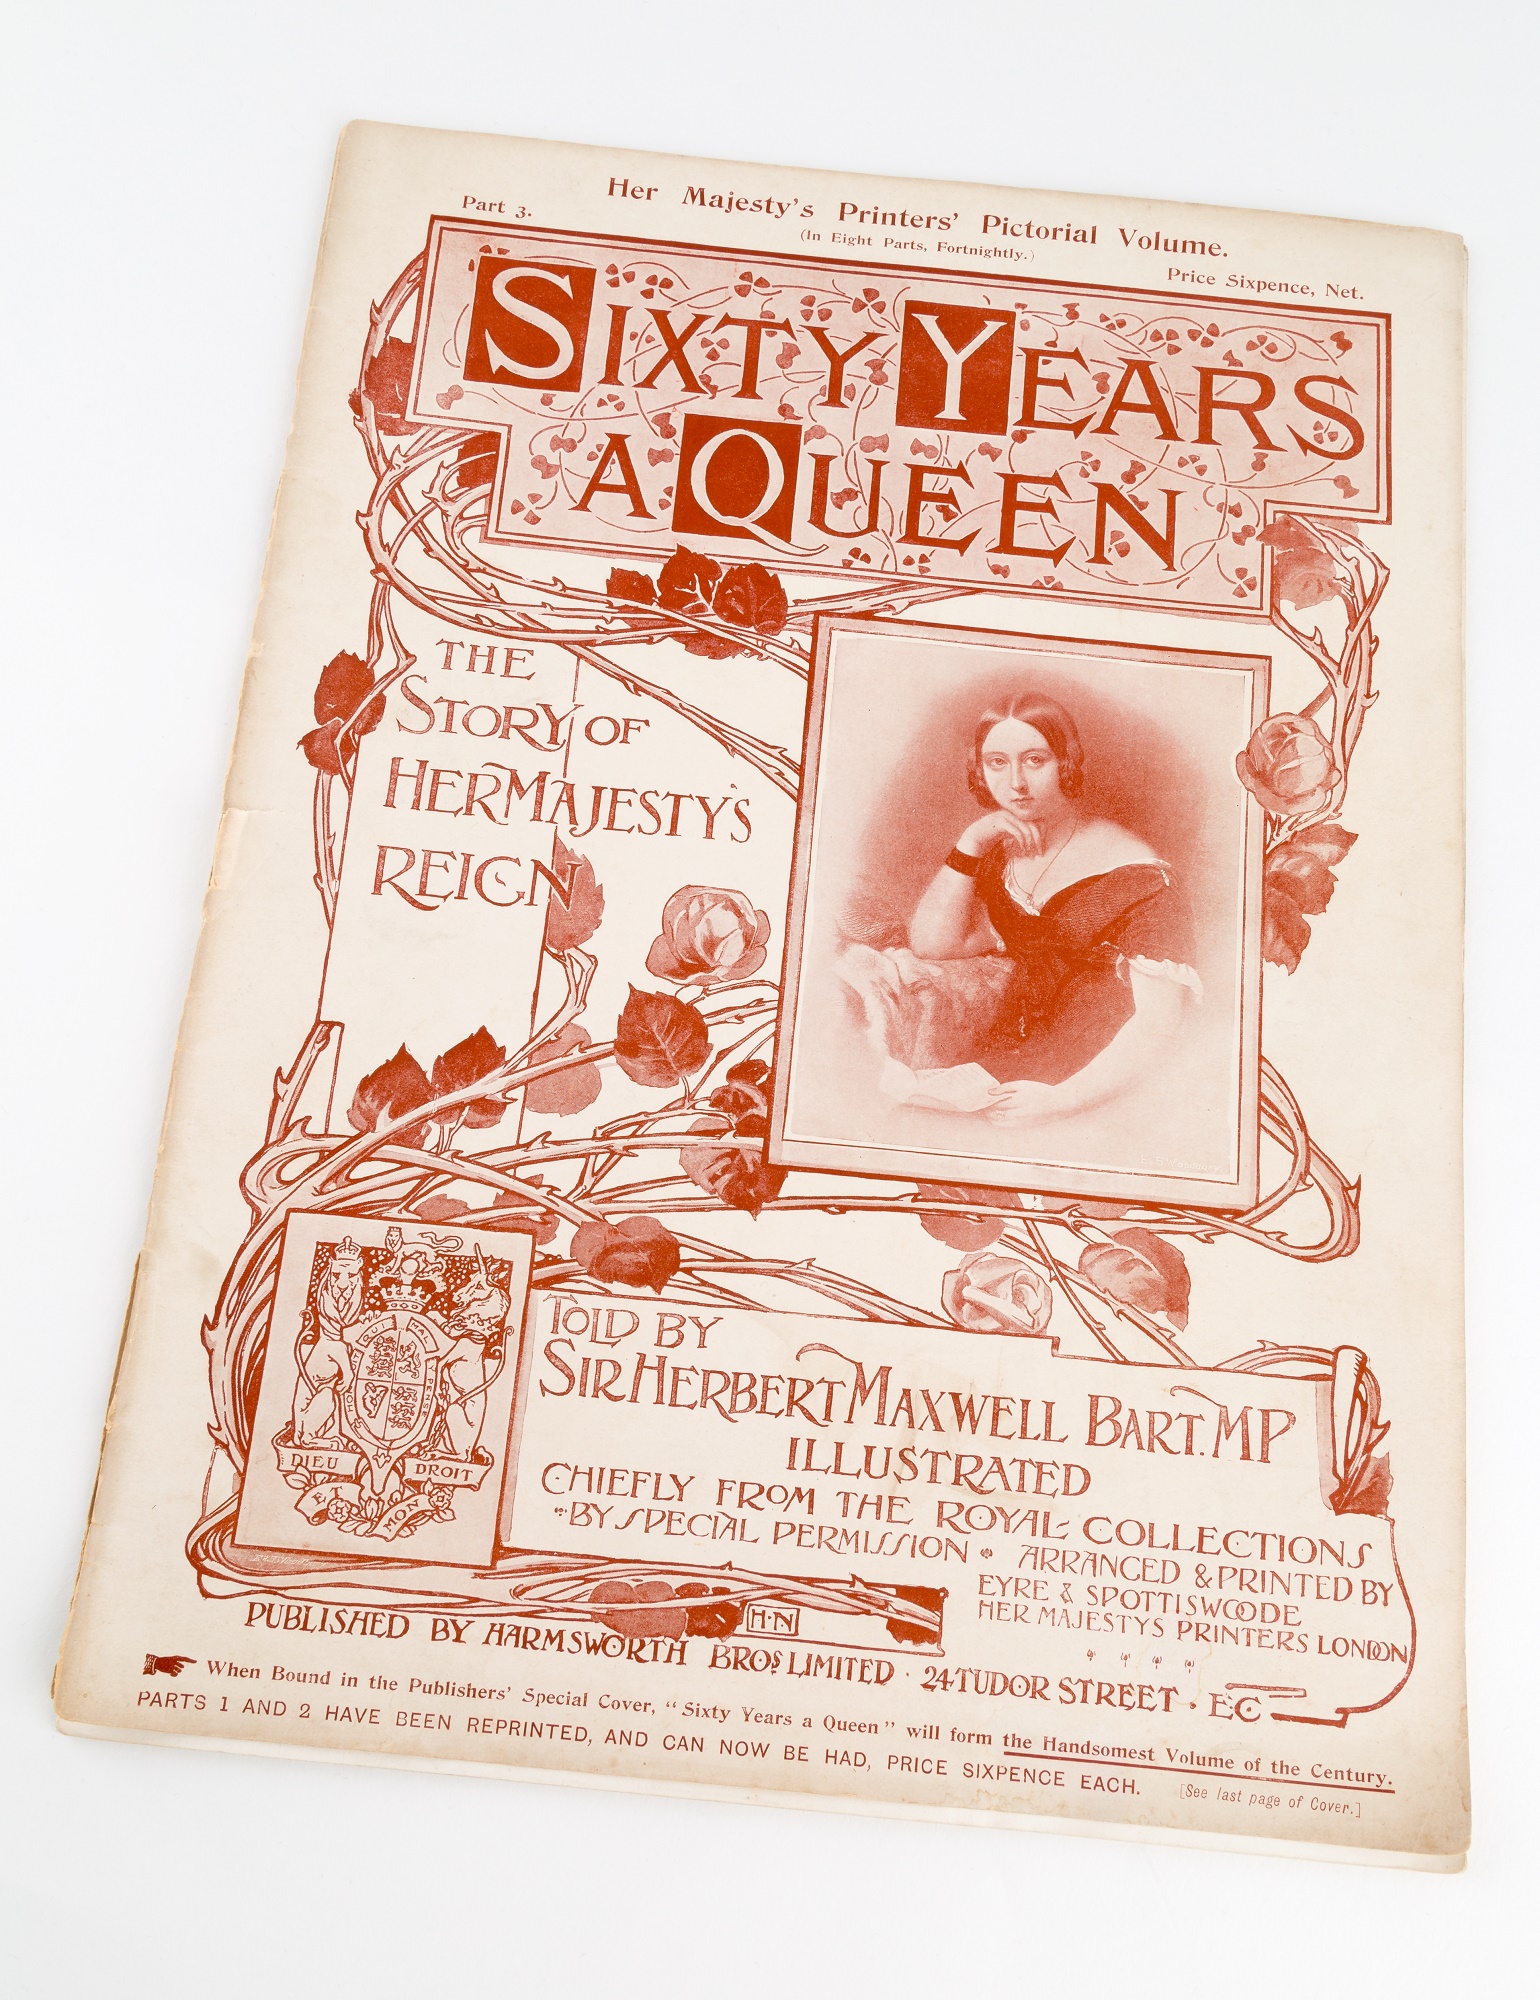 Her Majesty's Printers' Pictorial Volume, Part 3. One of a collection of ten magazines entitled 'Sixty Years A Queen', by Herbert Maxwell Bart MP, 1897.